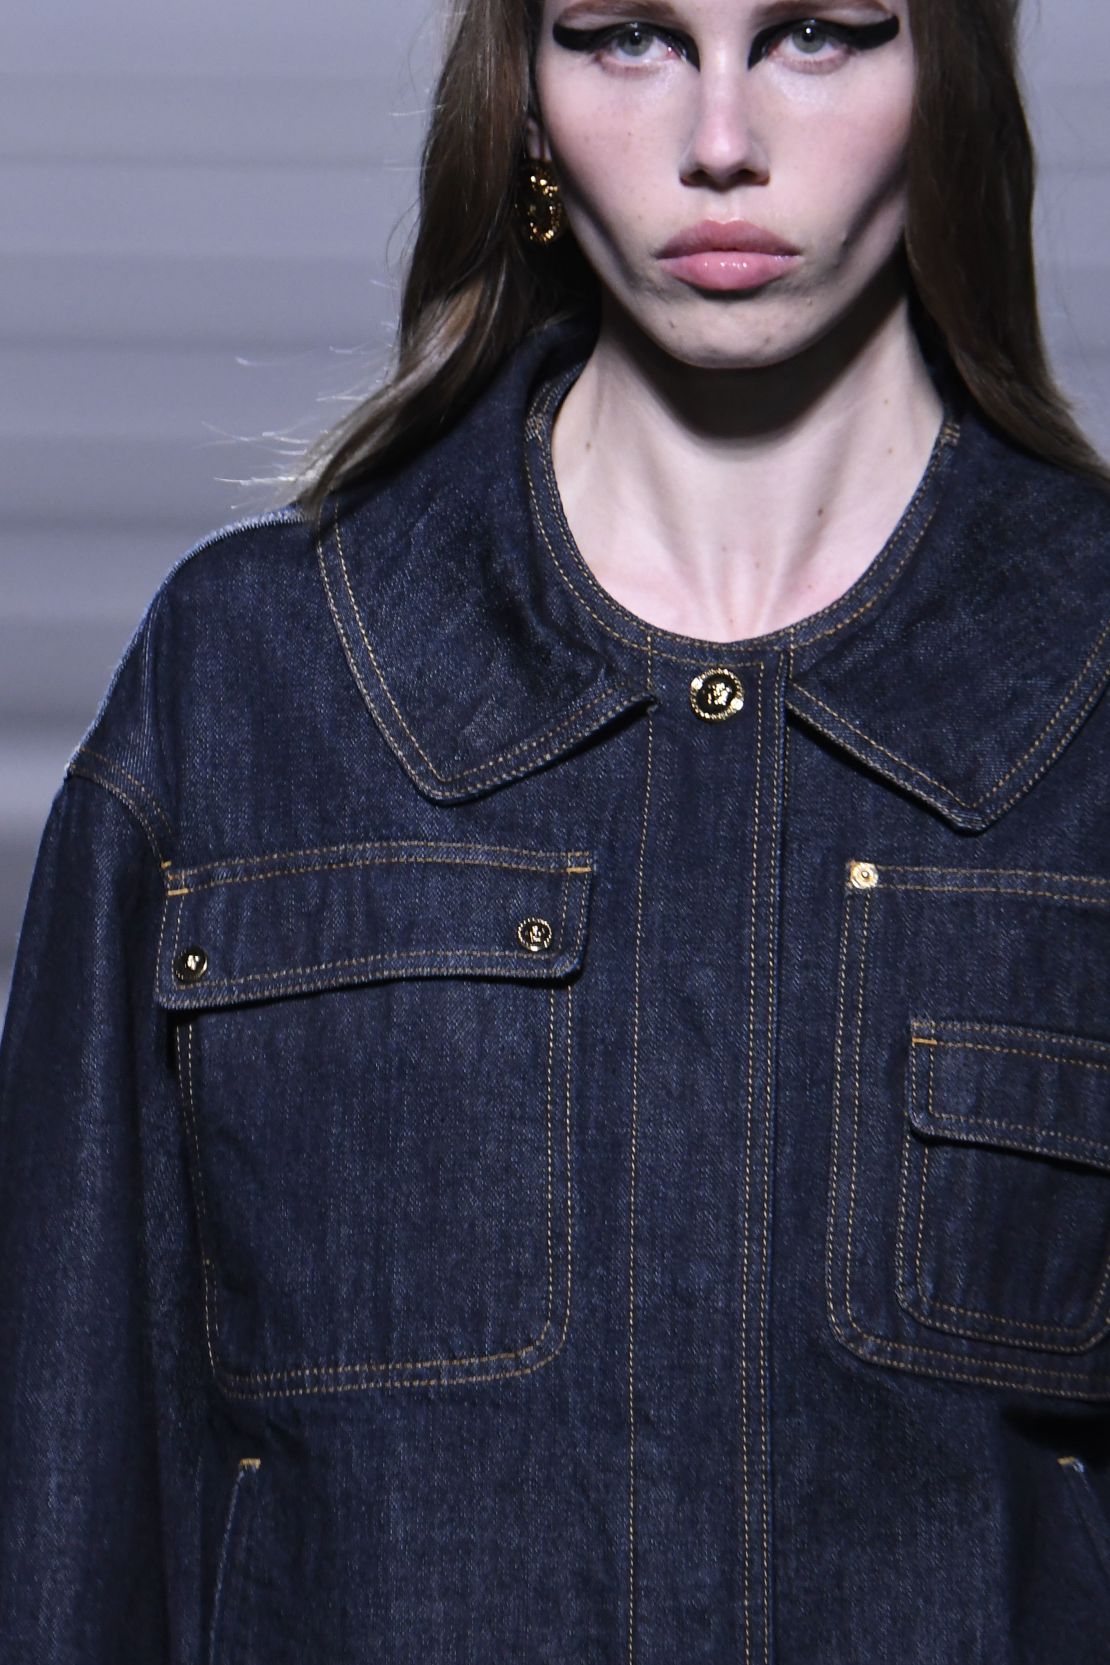 A focus on dark tones also extended to denim where deep washes were the order of the season.